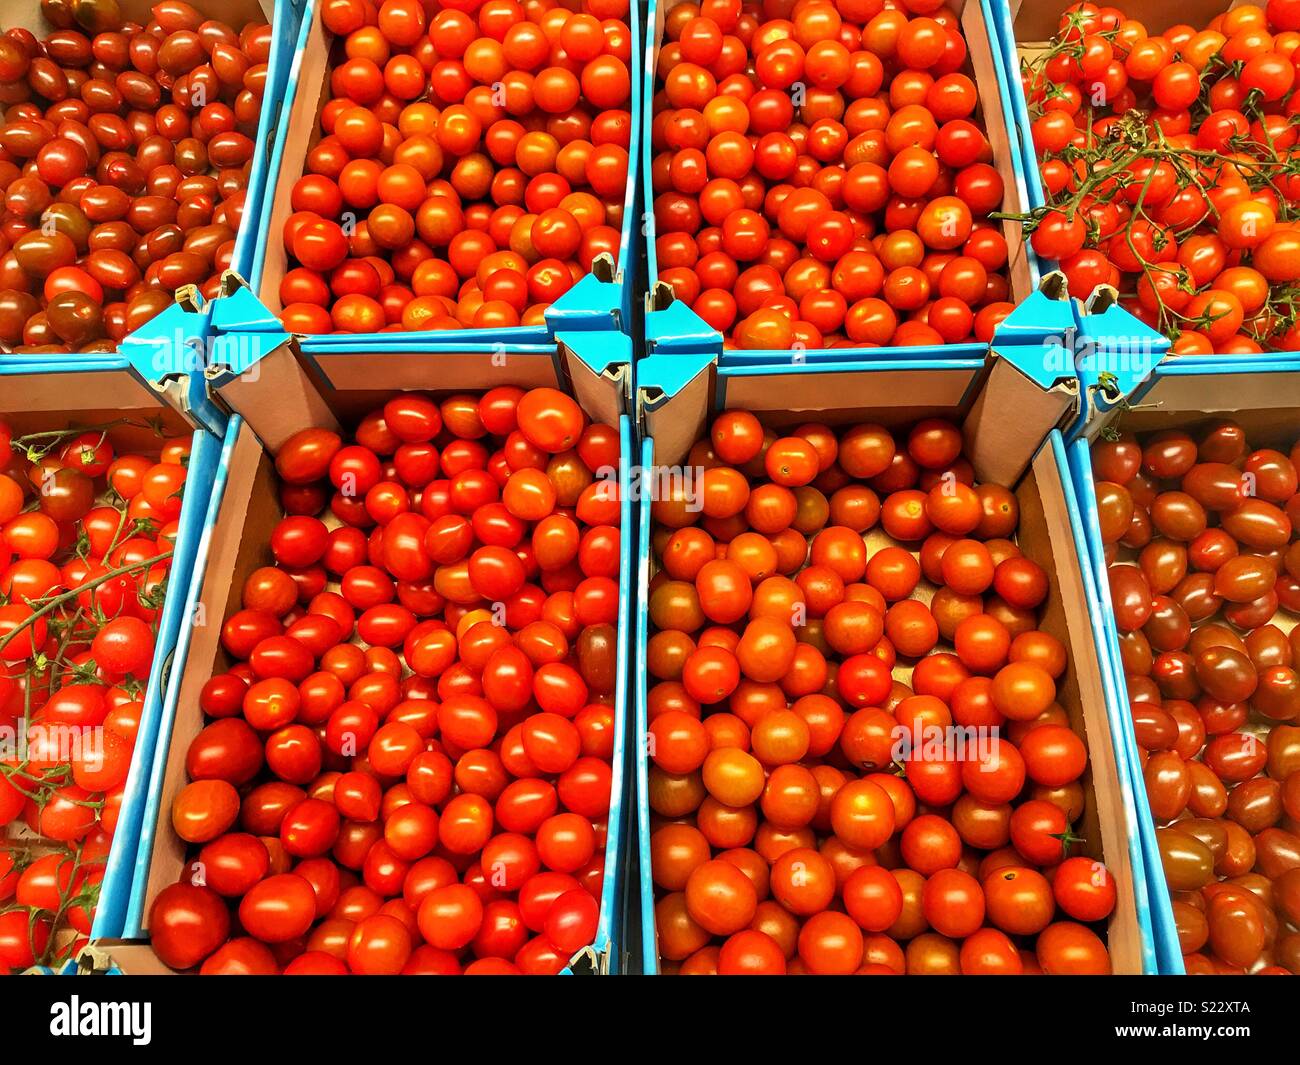 Assortment of different types of tomatoes displayed in crates in a supermarket, Spain Stock Photo